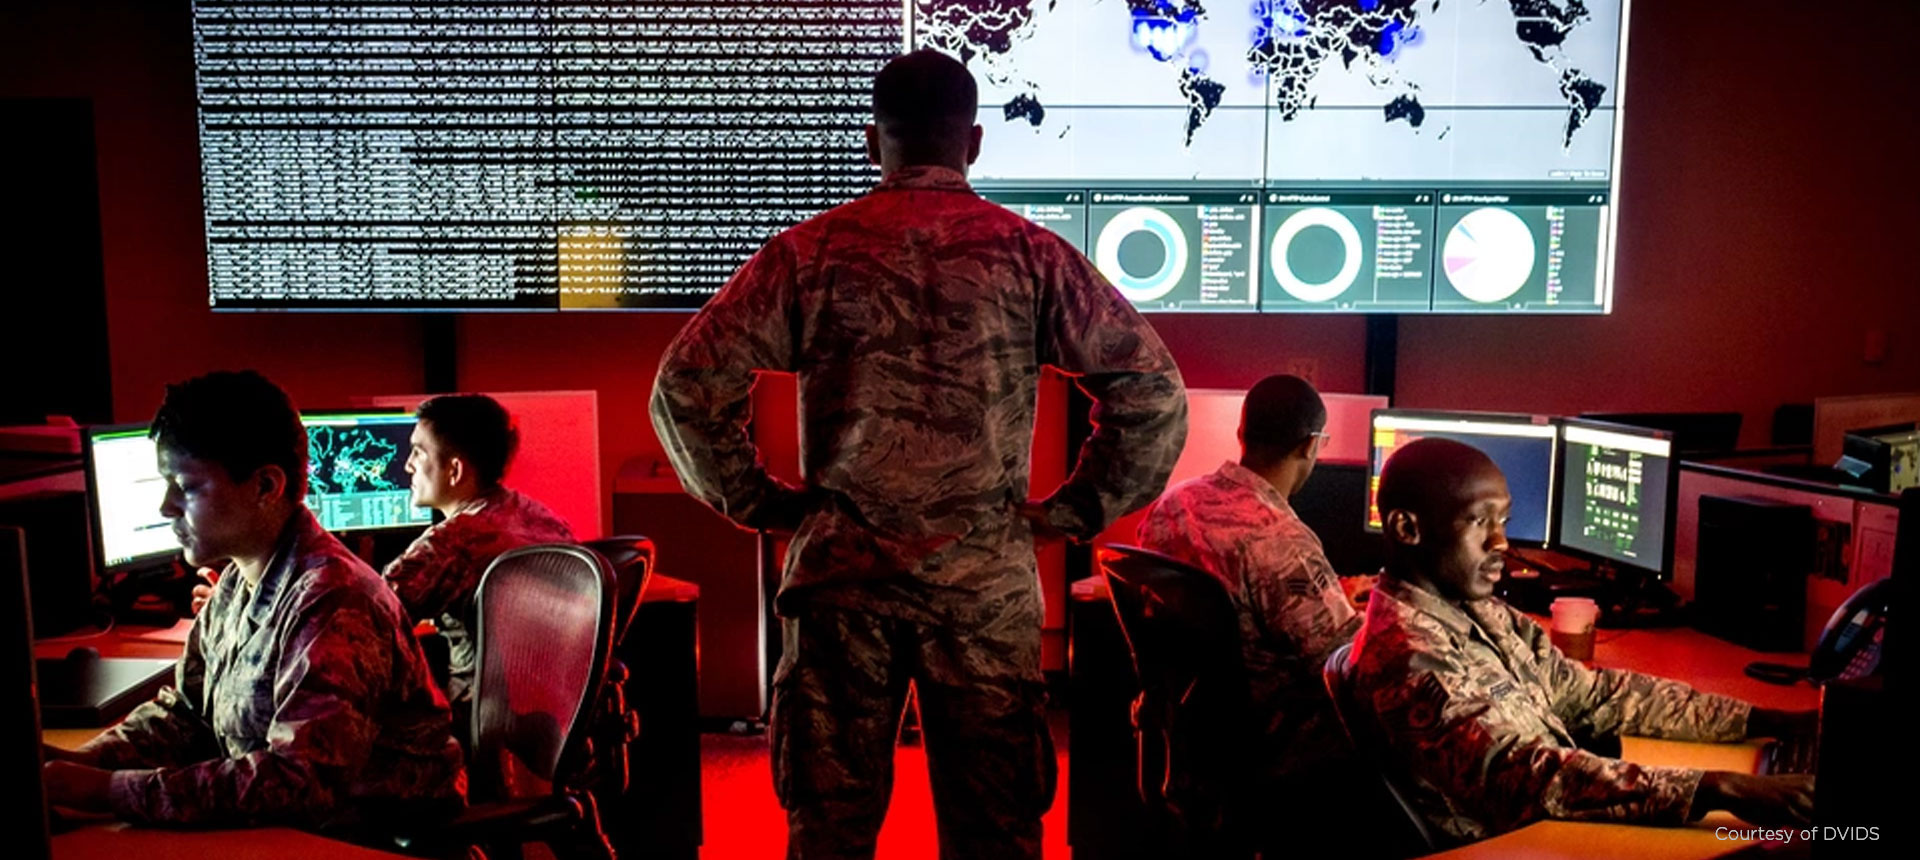 Photo: Military personnel monitoring emerging threats from across the globe